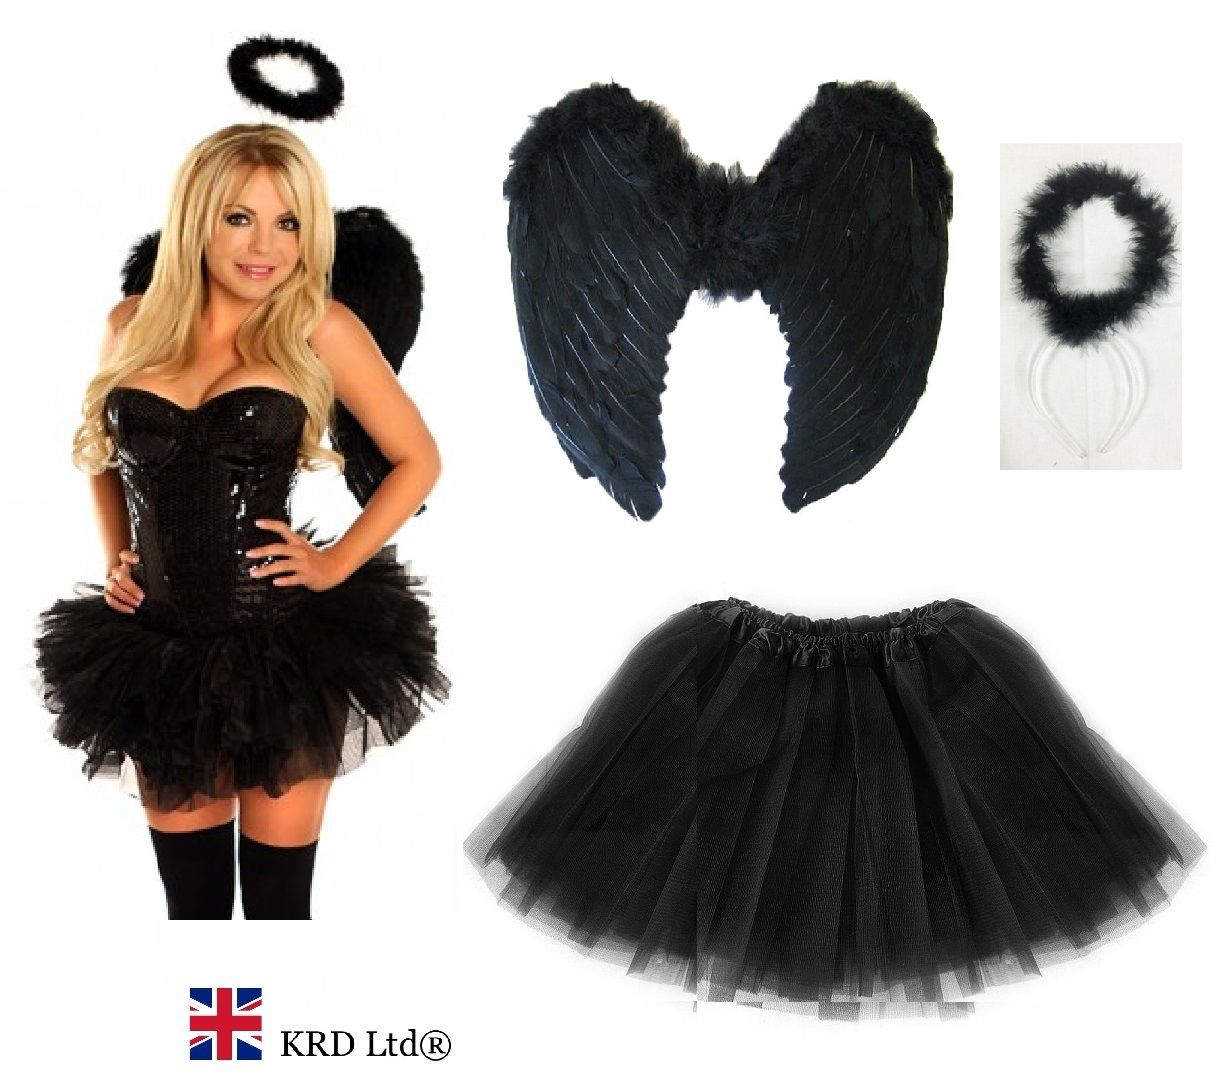 Dark Angel Fairy Feather Wings Halo Fancy Dress Costume Outfit Hen Party BLACK